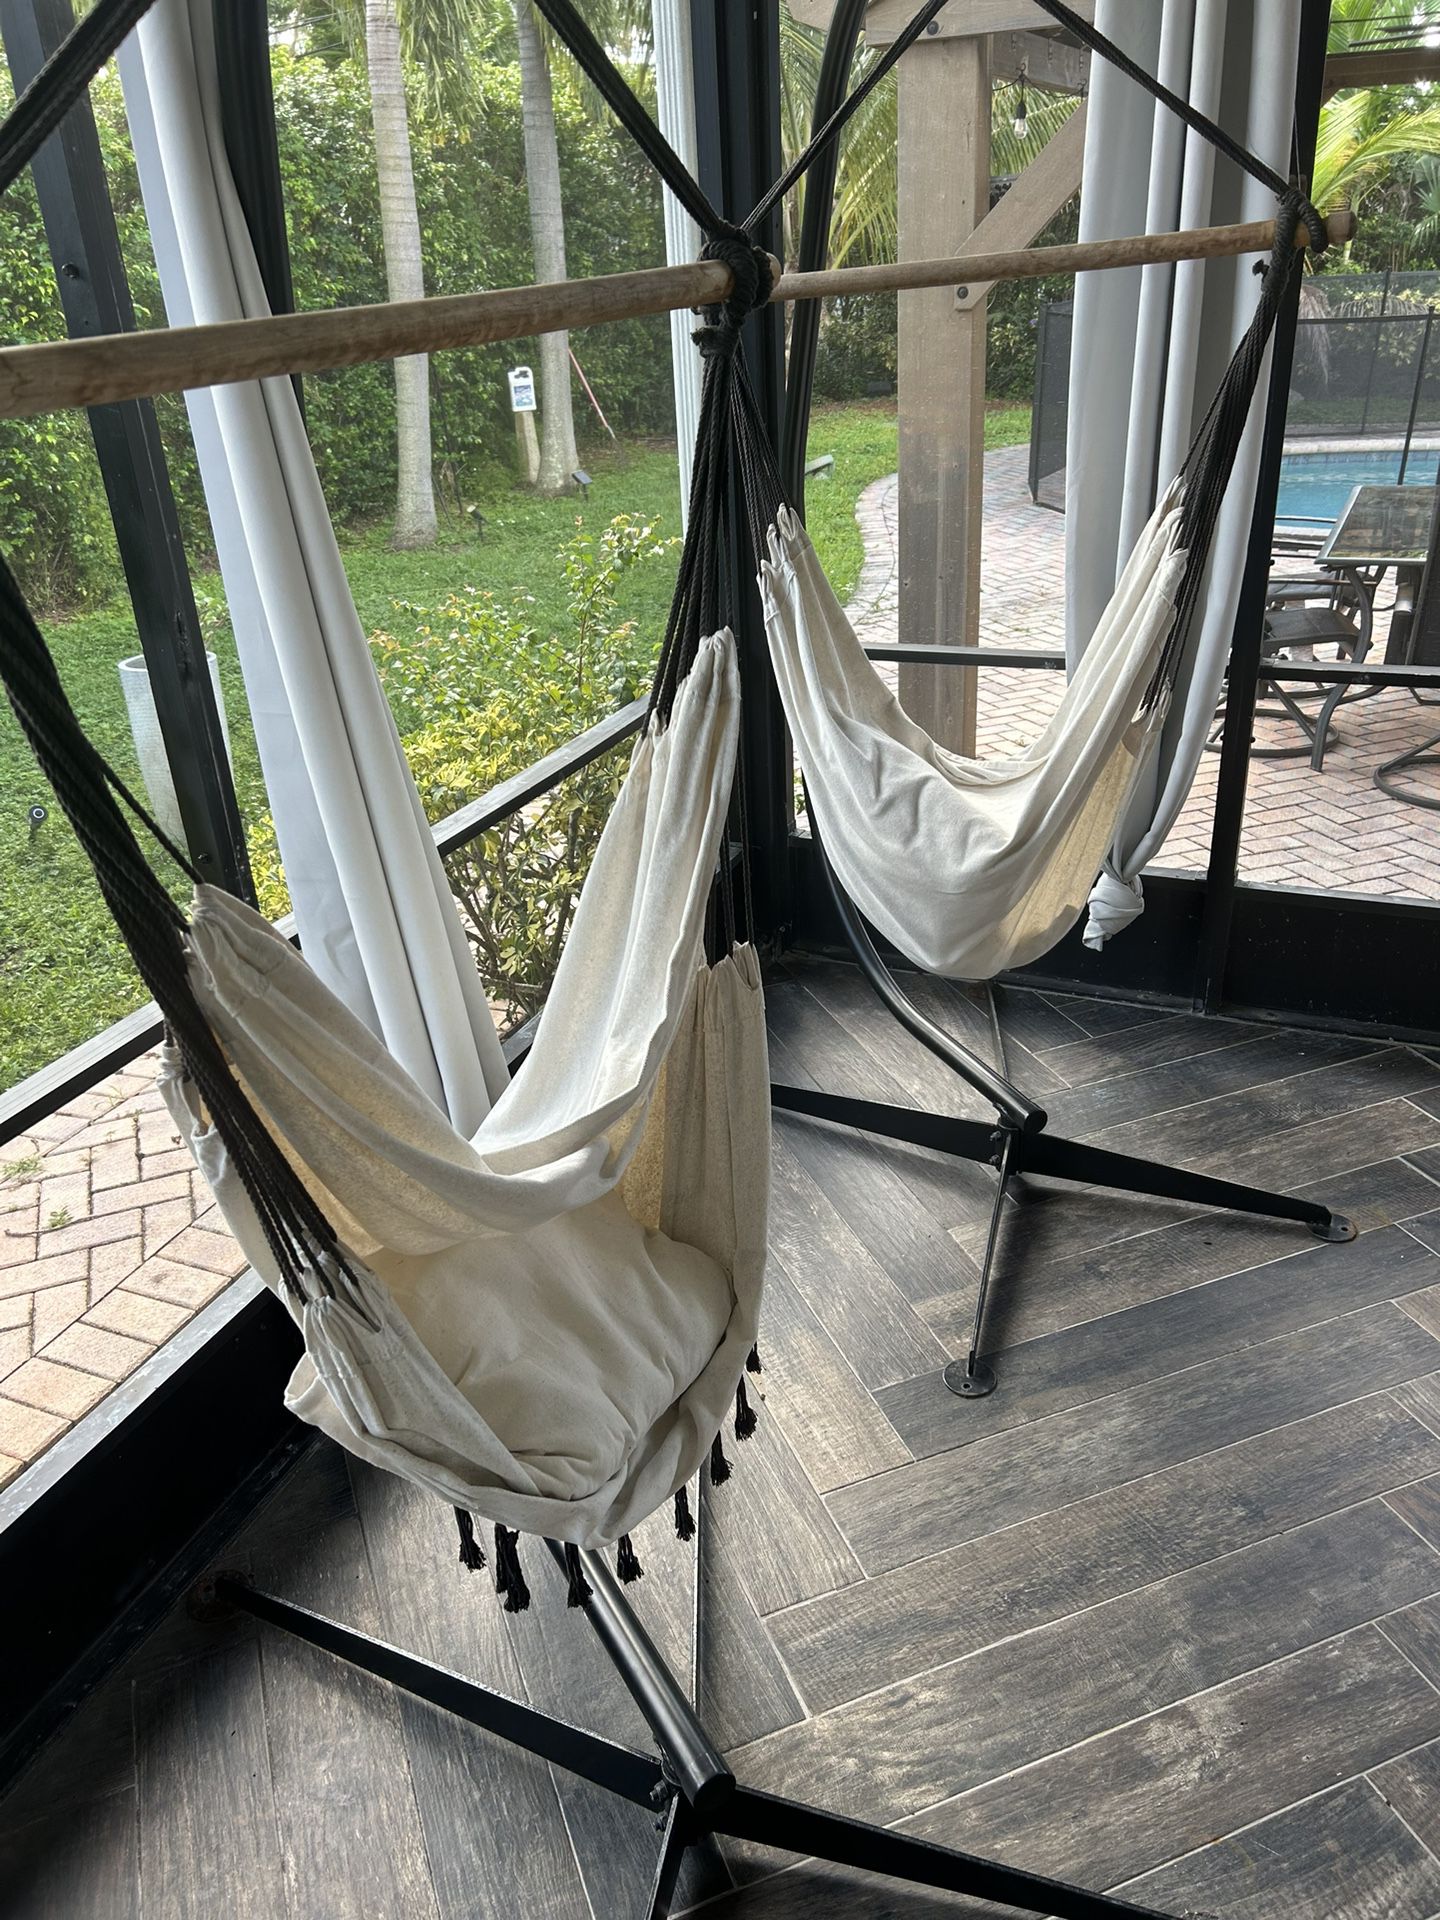 Hanging Swing chairs